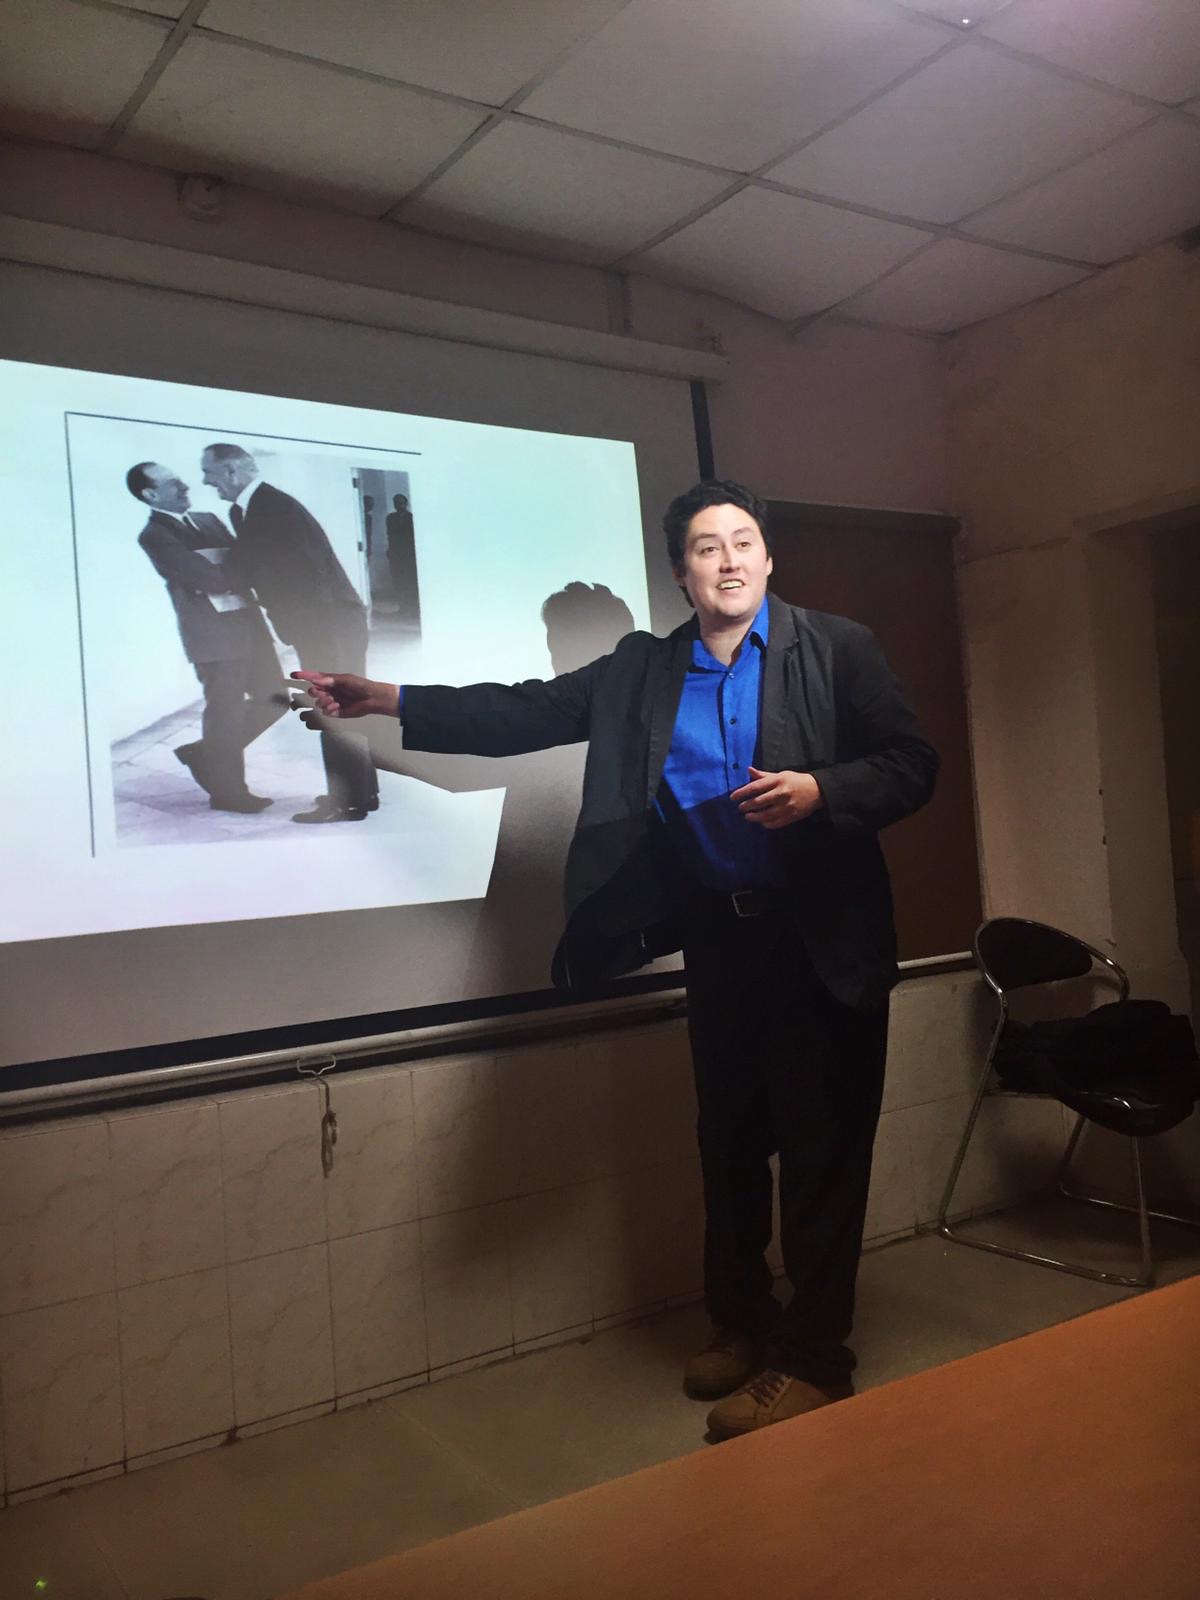 Pic of Delivering a lecture at Ambedkar University Delhi (located in New Delhi) about U.S. food aid to India during the 1960s